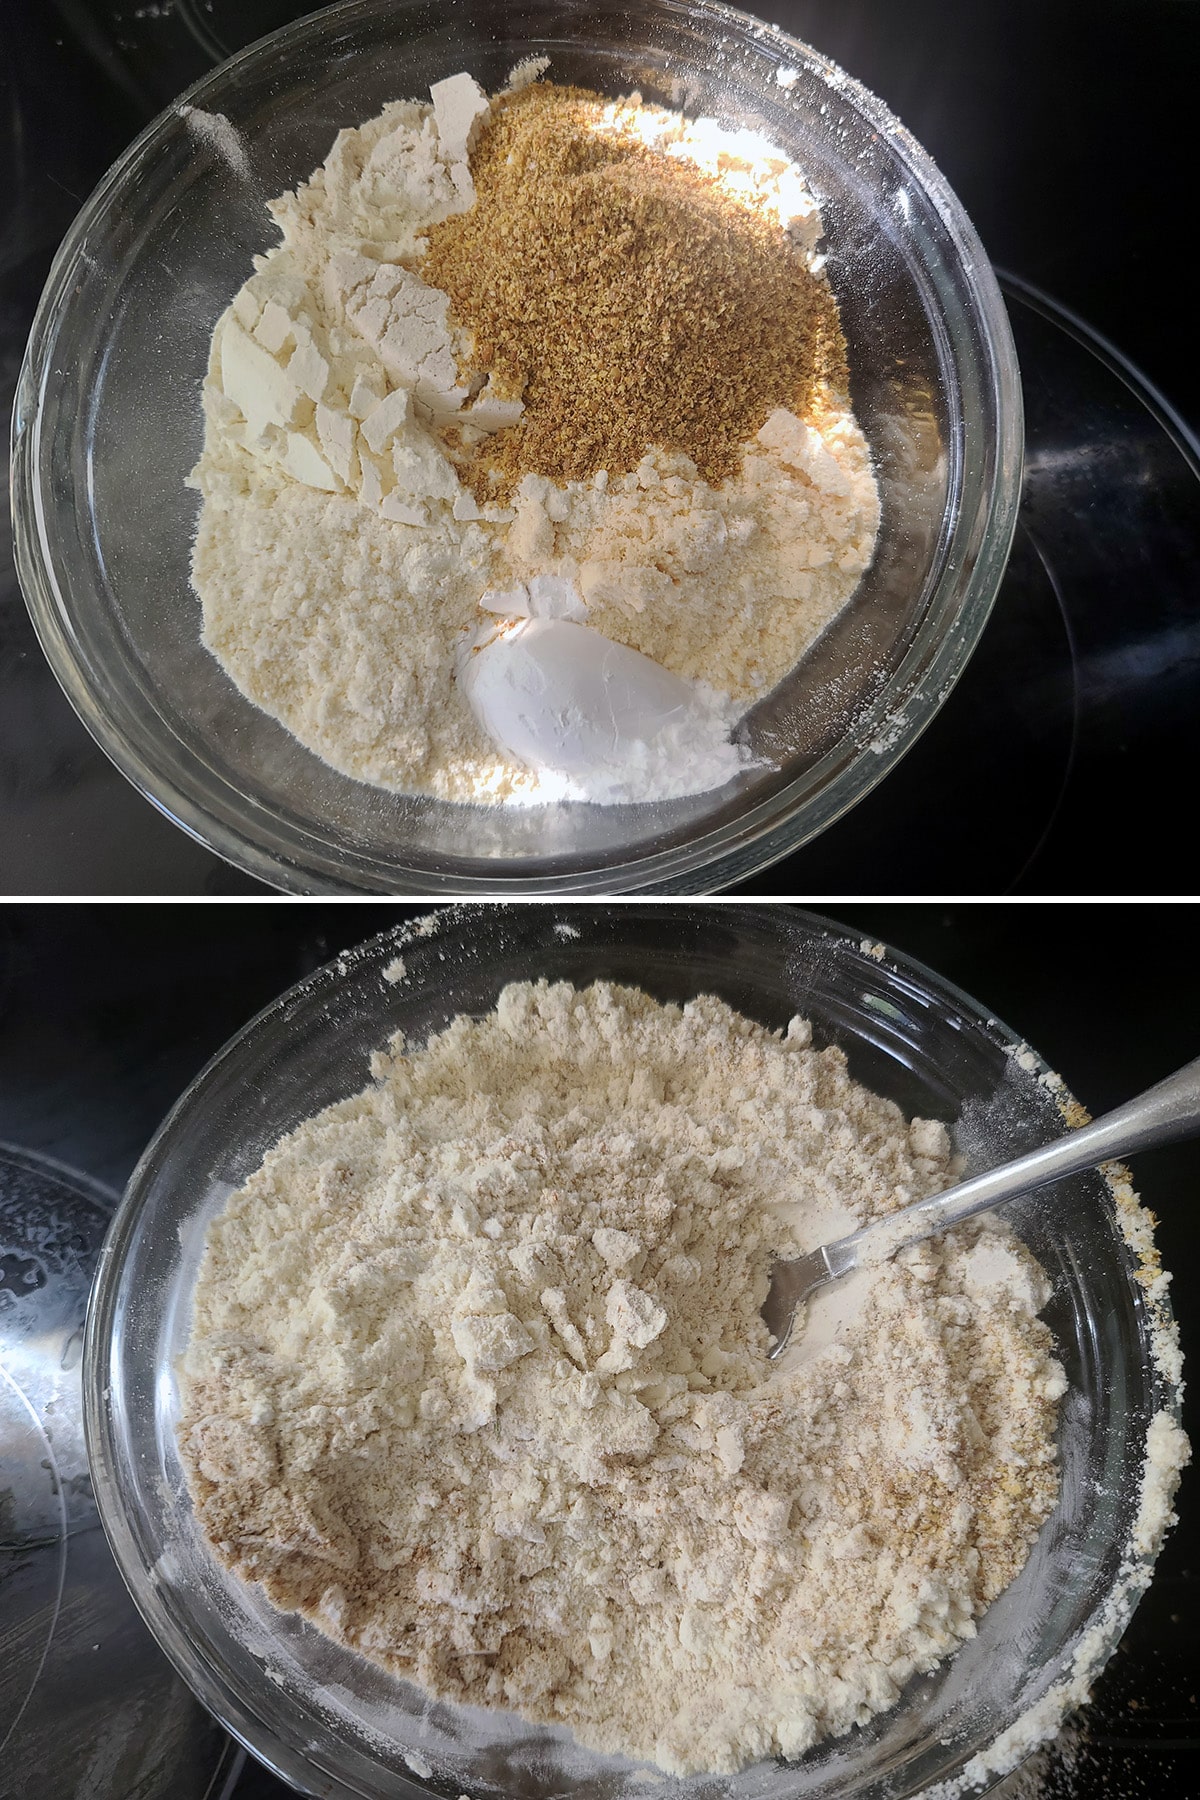 A 2 part image showing the dry ingredients being mixed together.